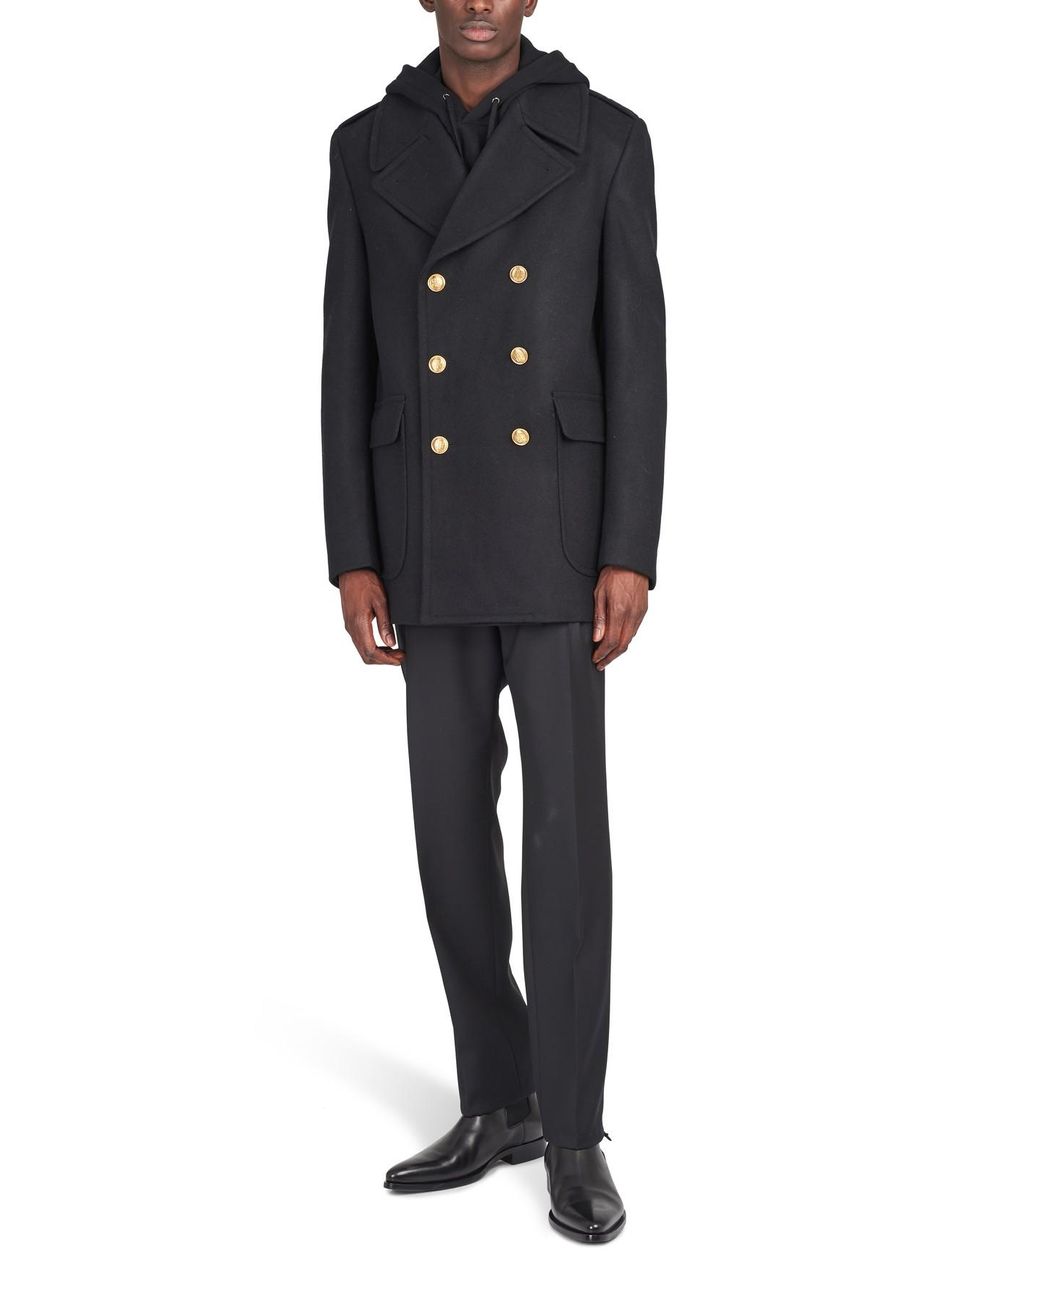 Givenchy Classic Peacoat With Gold Buttons in Black for Men | Lyst